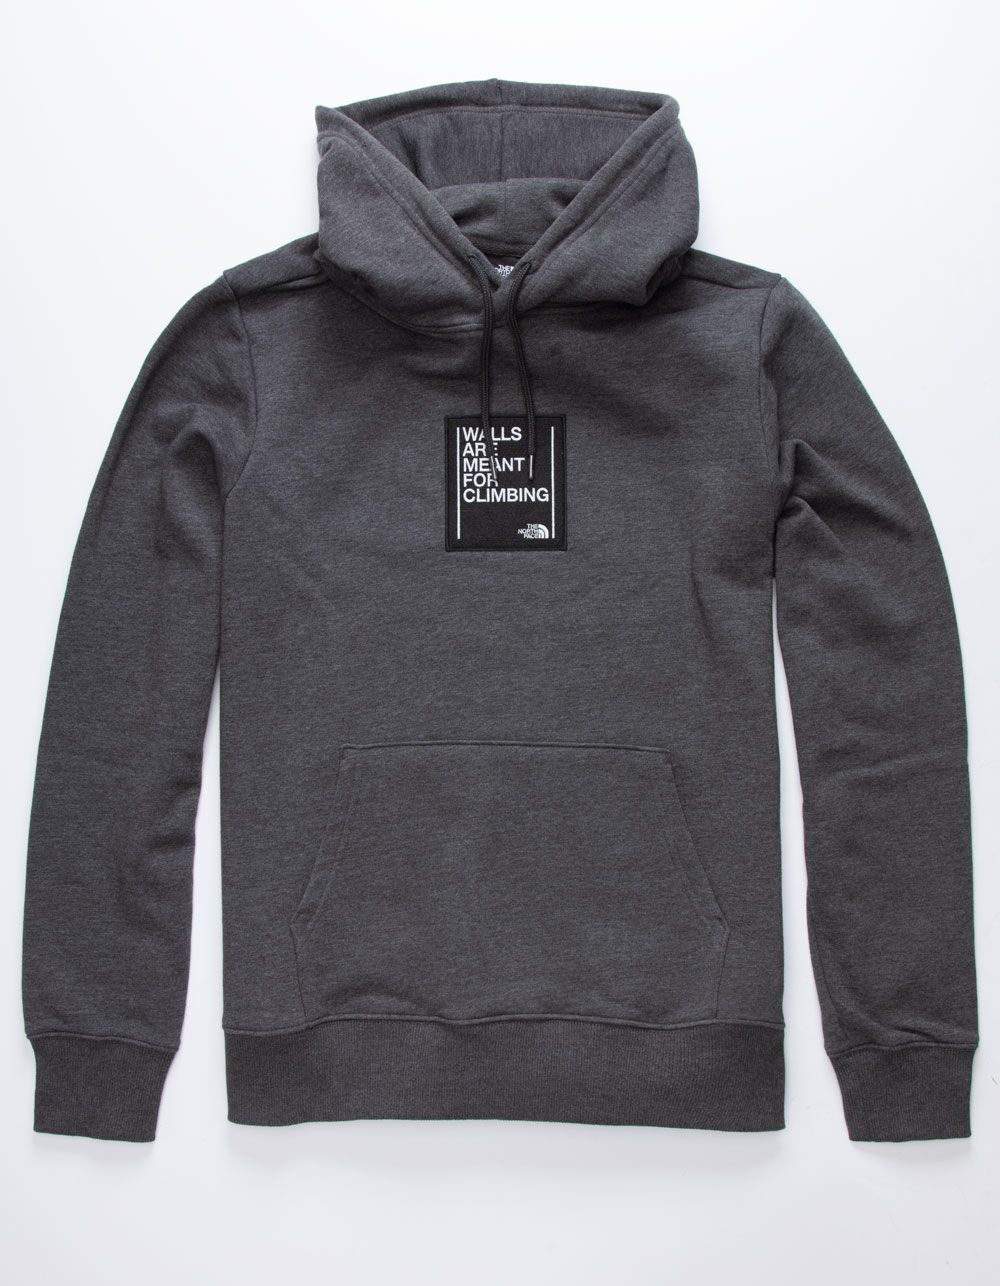 THE NORTH FACE Walls Are Meant For Climbing Hoodie - CHARCOAL | Tillys